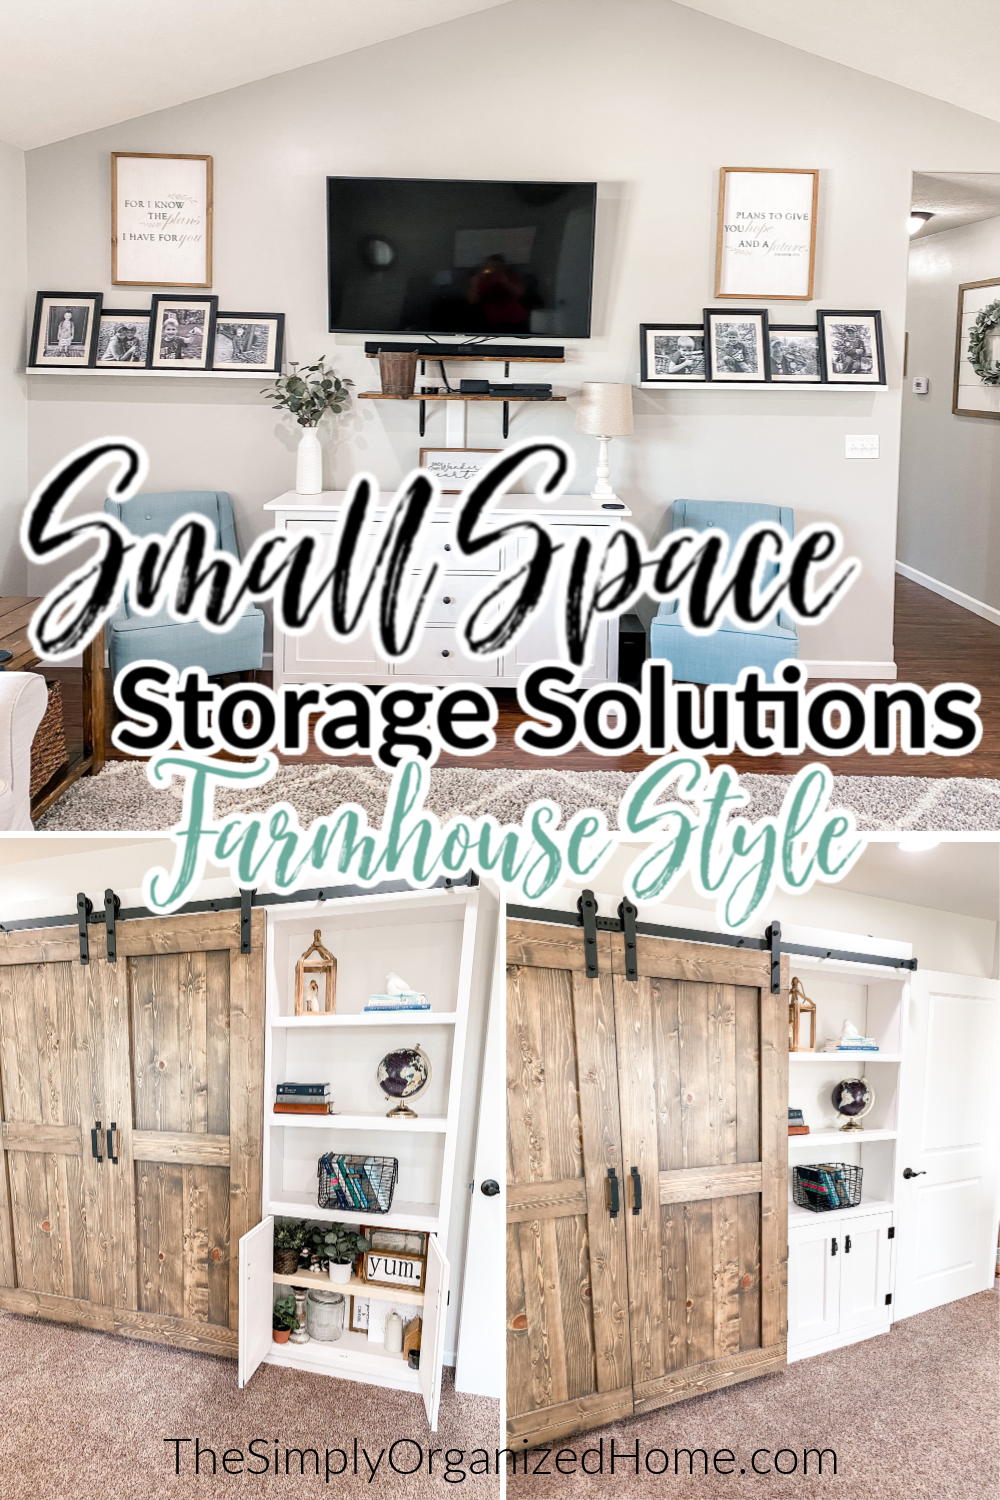 Farmhouse Style Small Space Storage Solutions - The Simply Organized Home